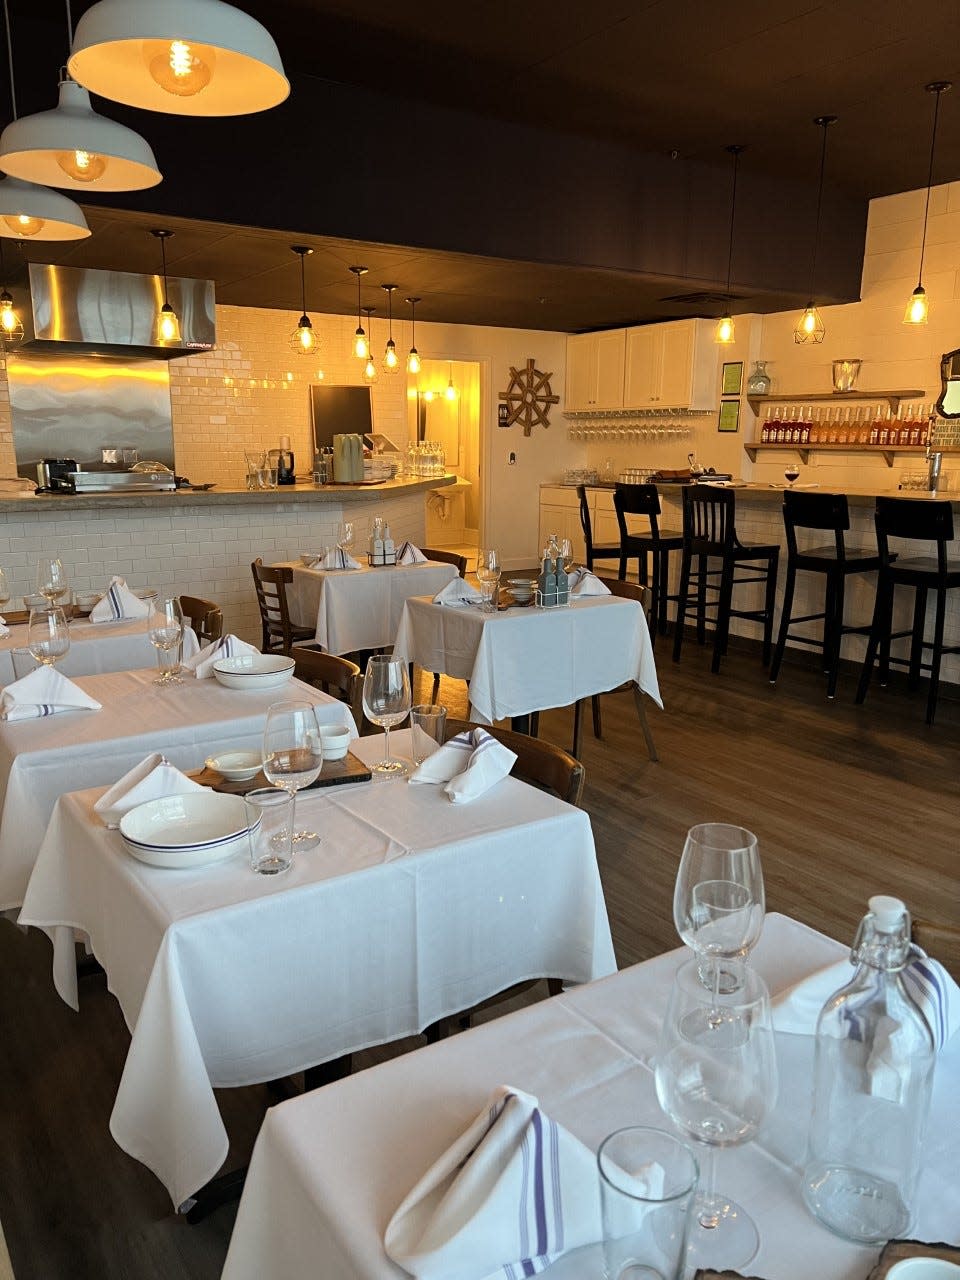 The Beach House Bistro in Pewaukee will soon open.